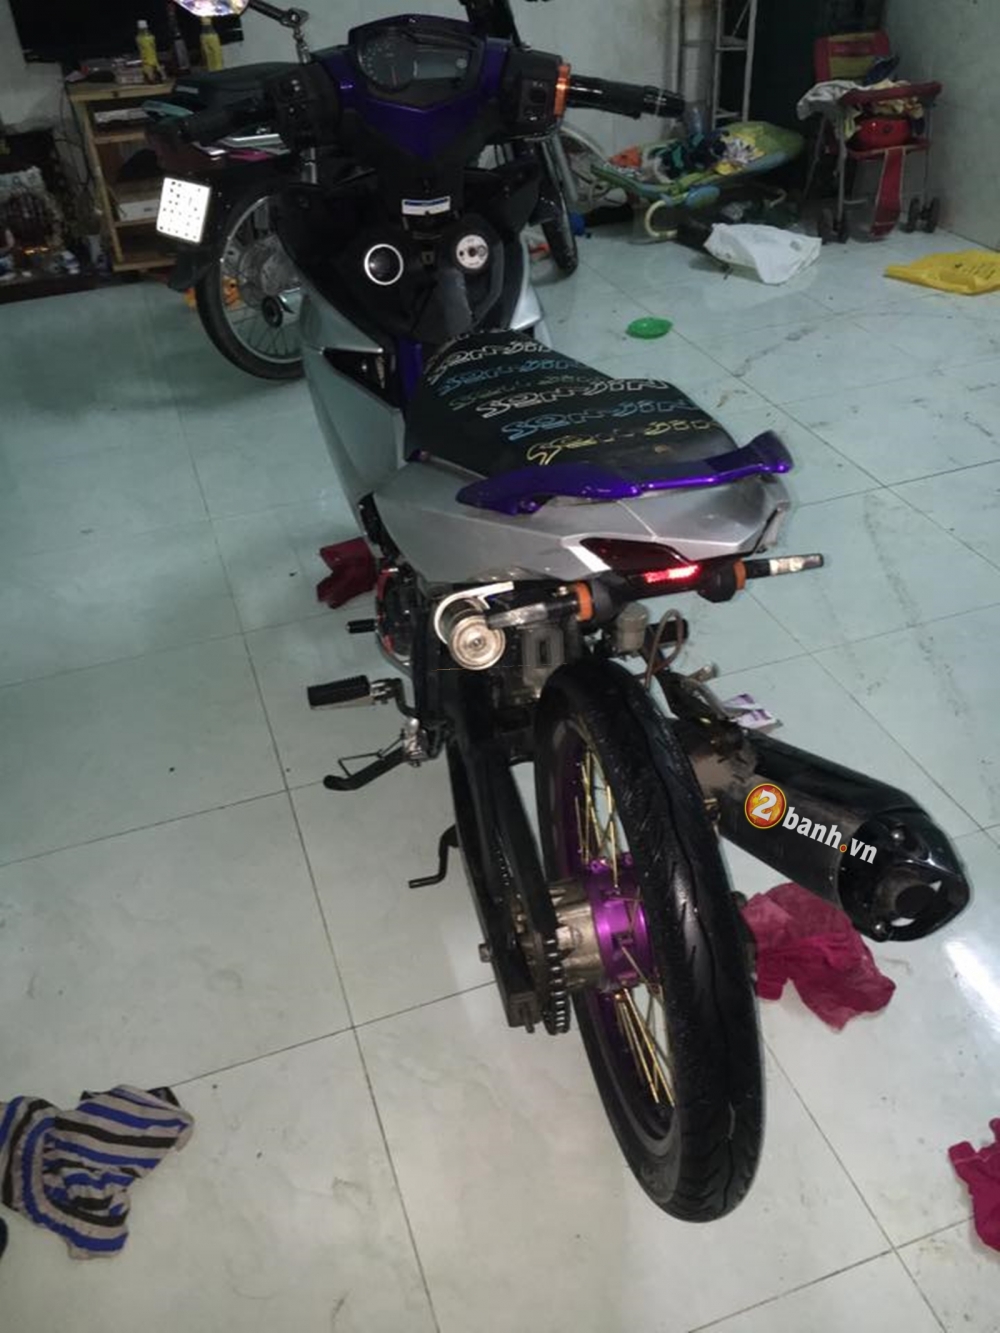 Exciter 150 don nhe cung banh cam - 2